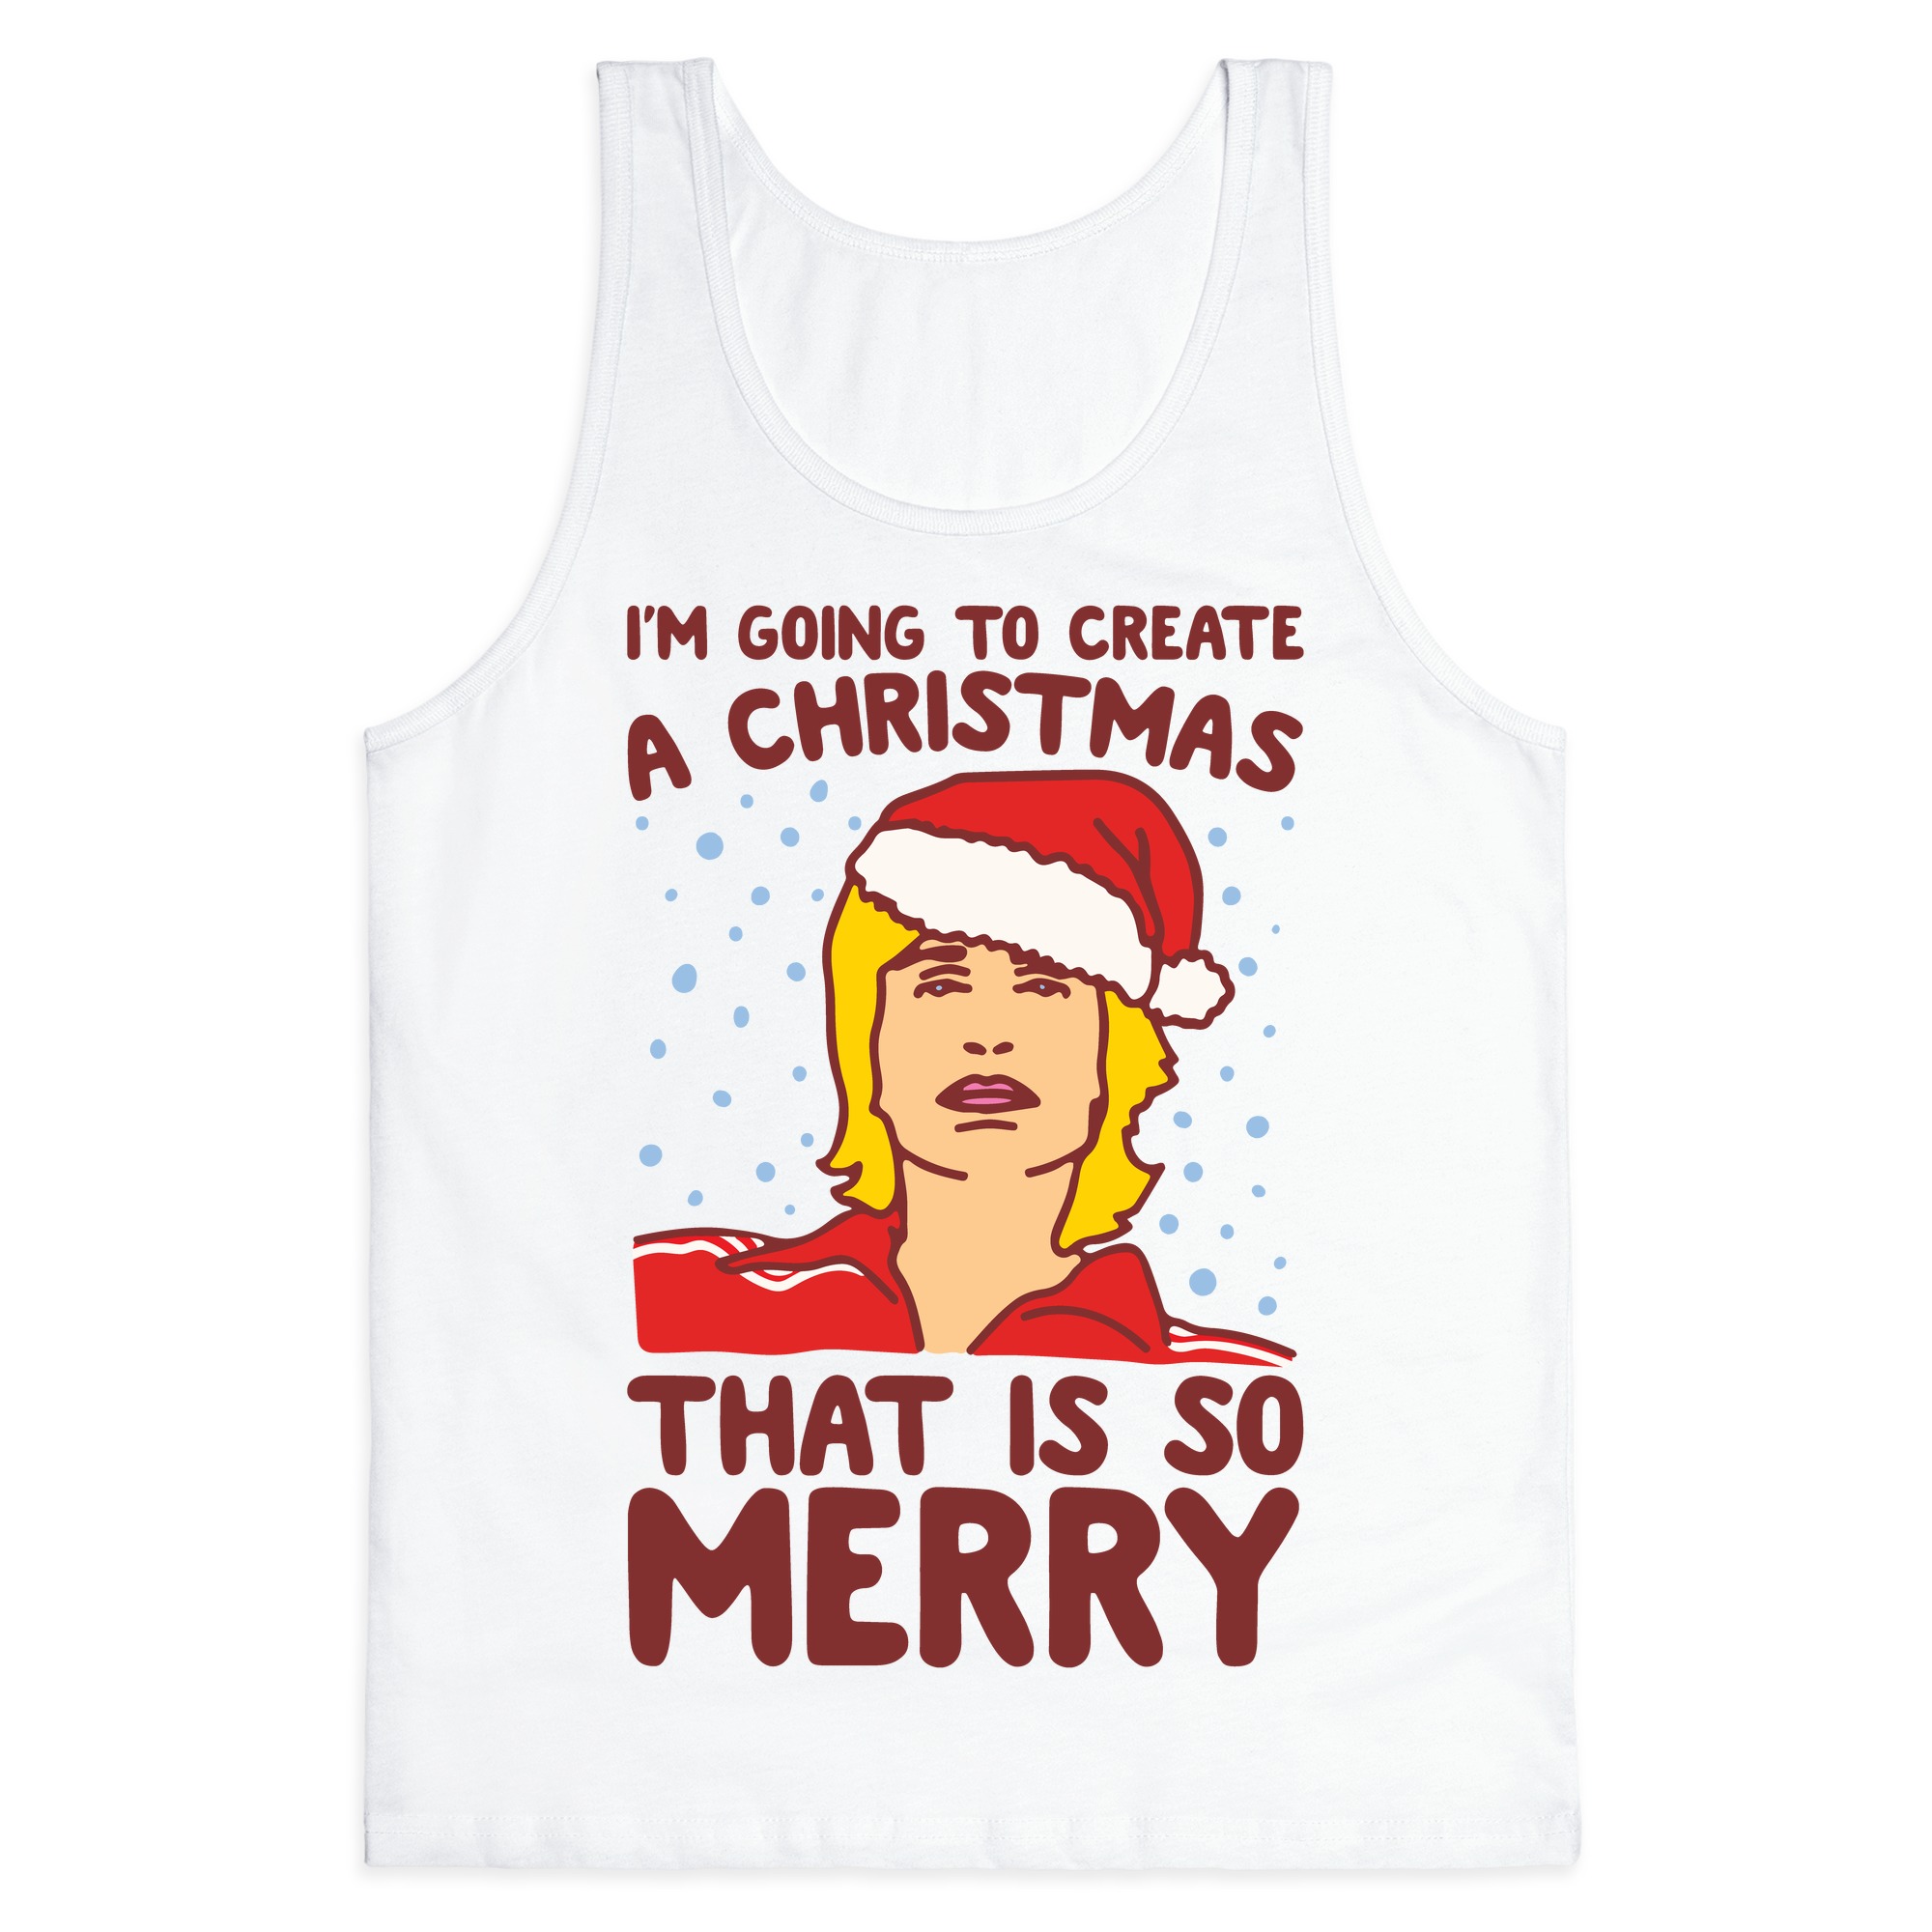 I M Going To Create A Christmas That Is So Merry Parody Tank Tops Lookhuman